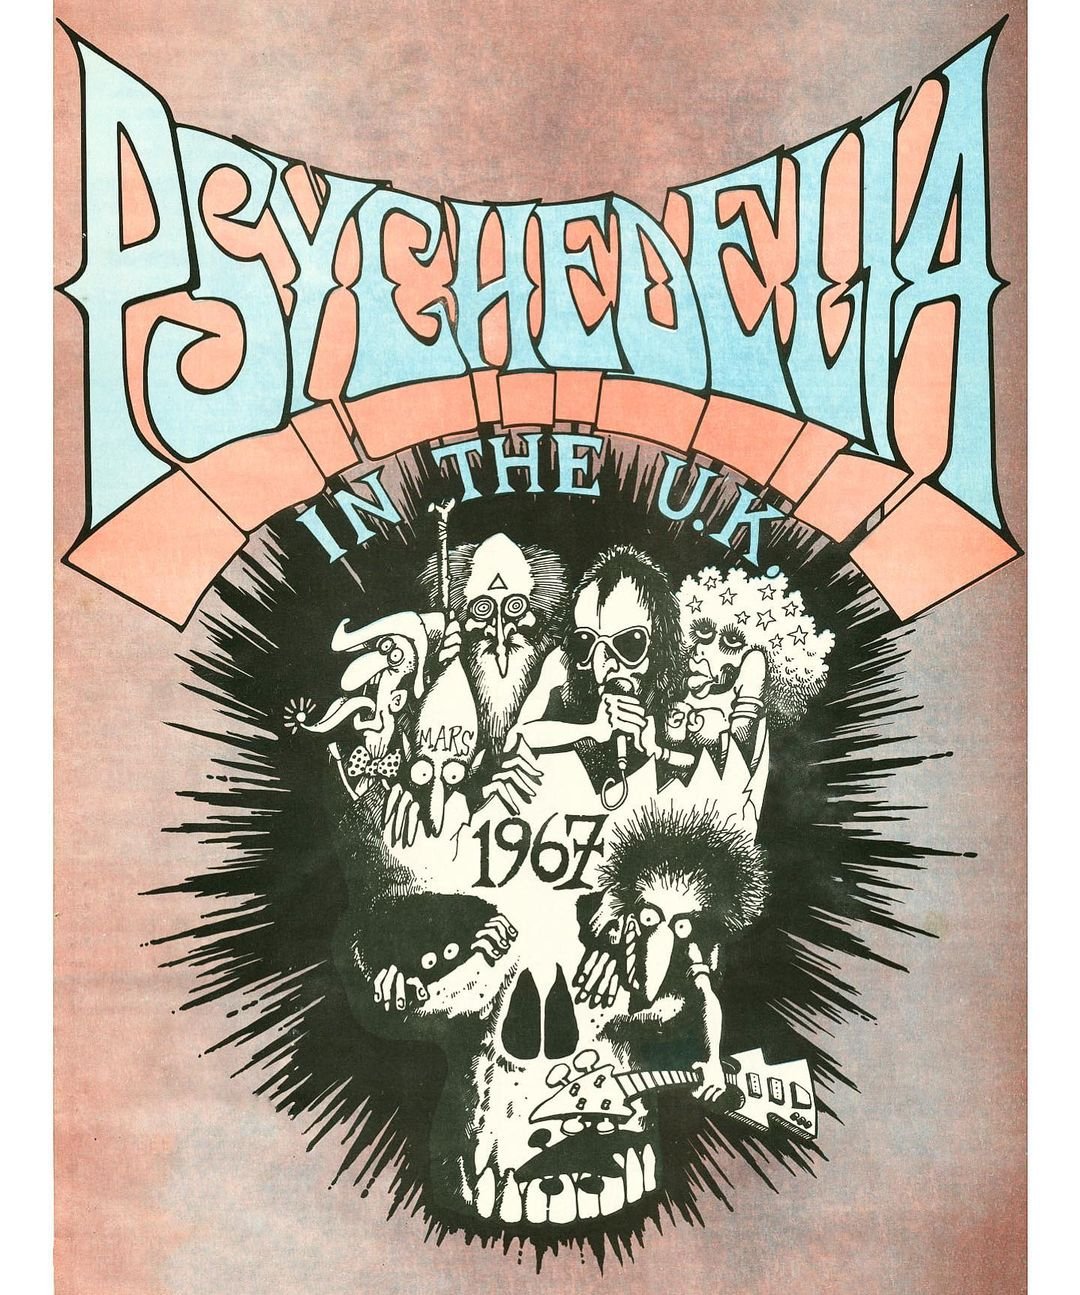 Psychedelia in the UK, 1977